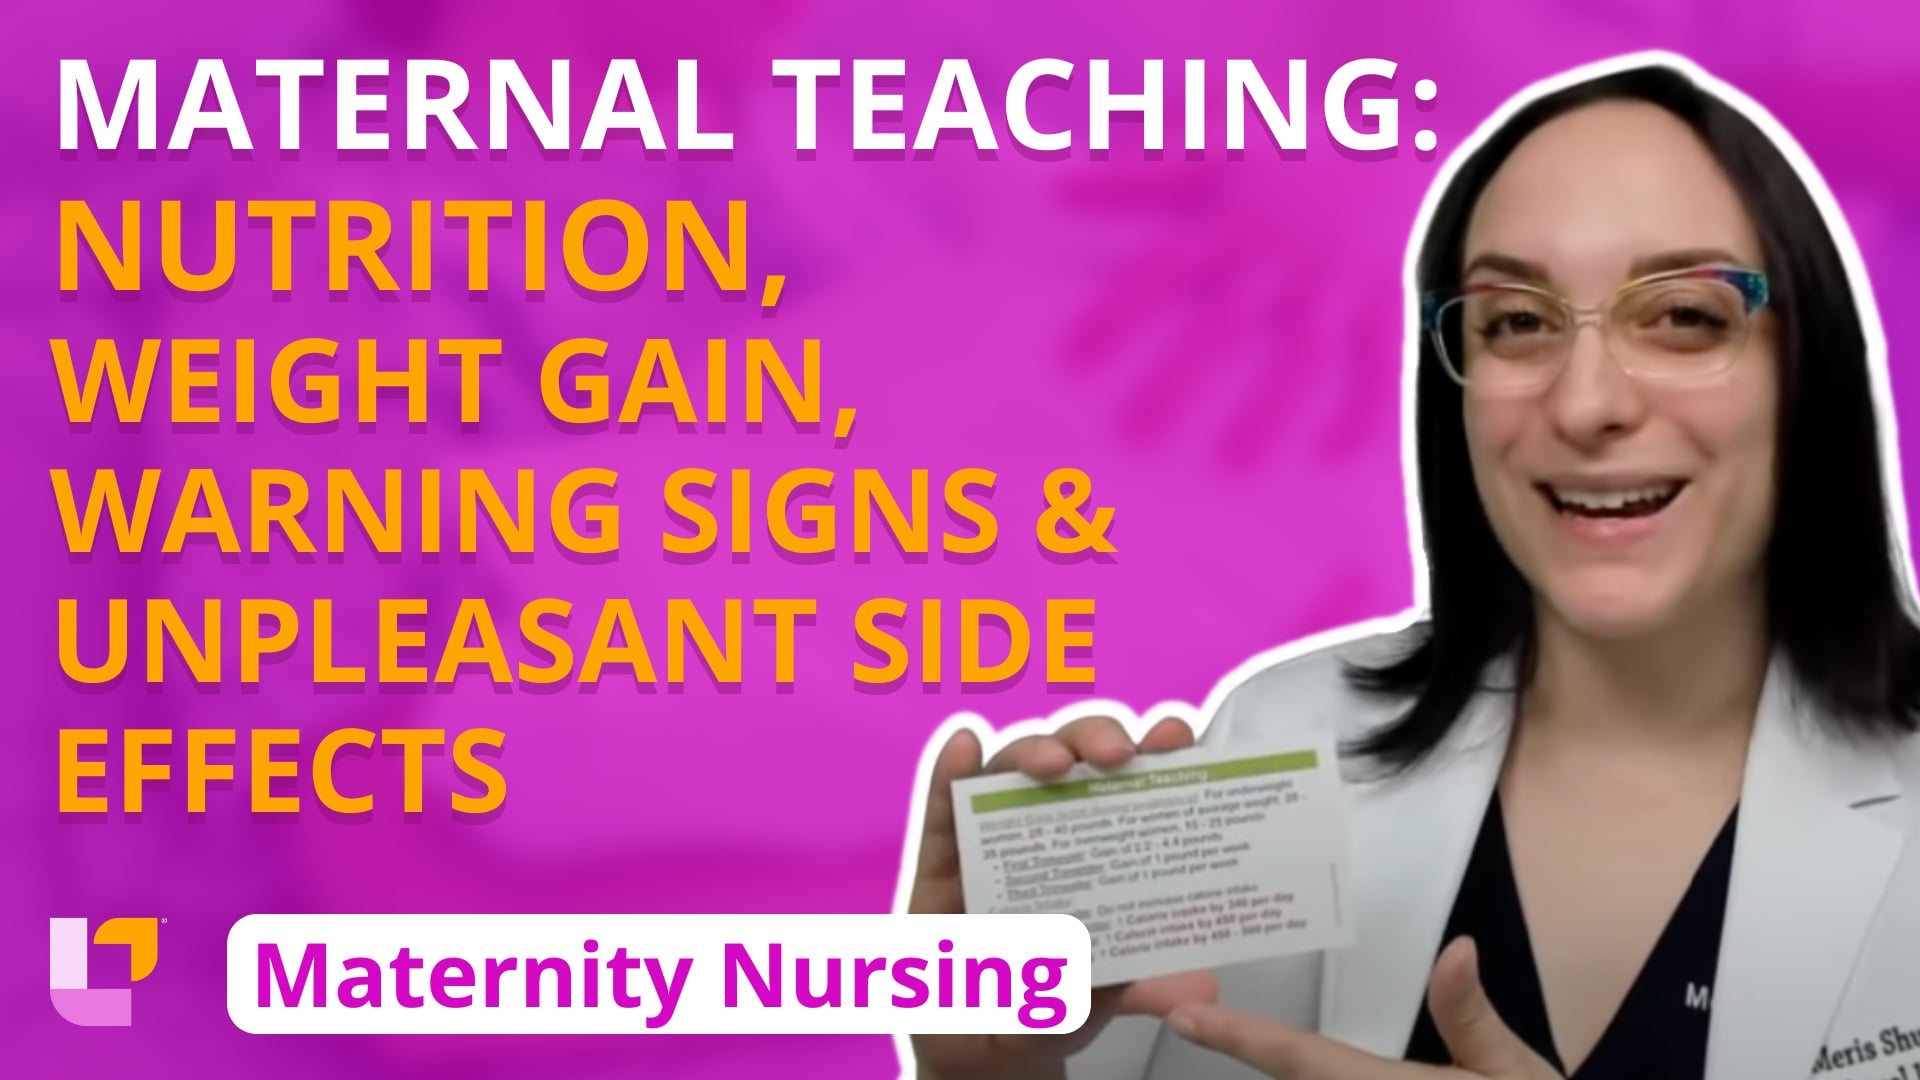 Maternity - Pregnancy, part 4: Maternal Teaching: Nutrition/Weight Gain, Warning Signs, Unpleasant Side Effects - LevelUpRN